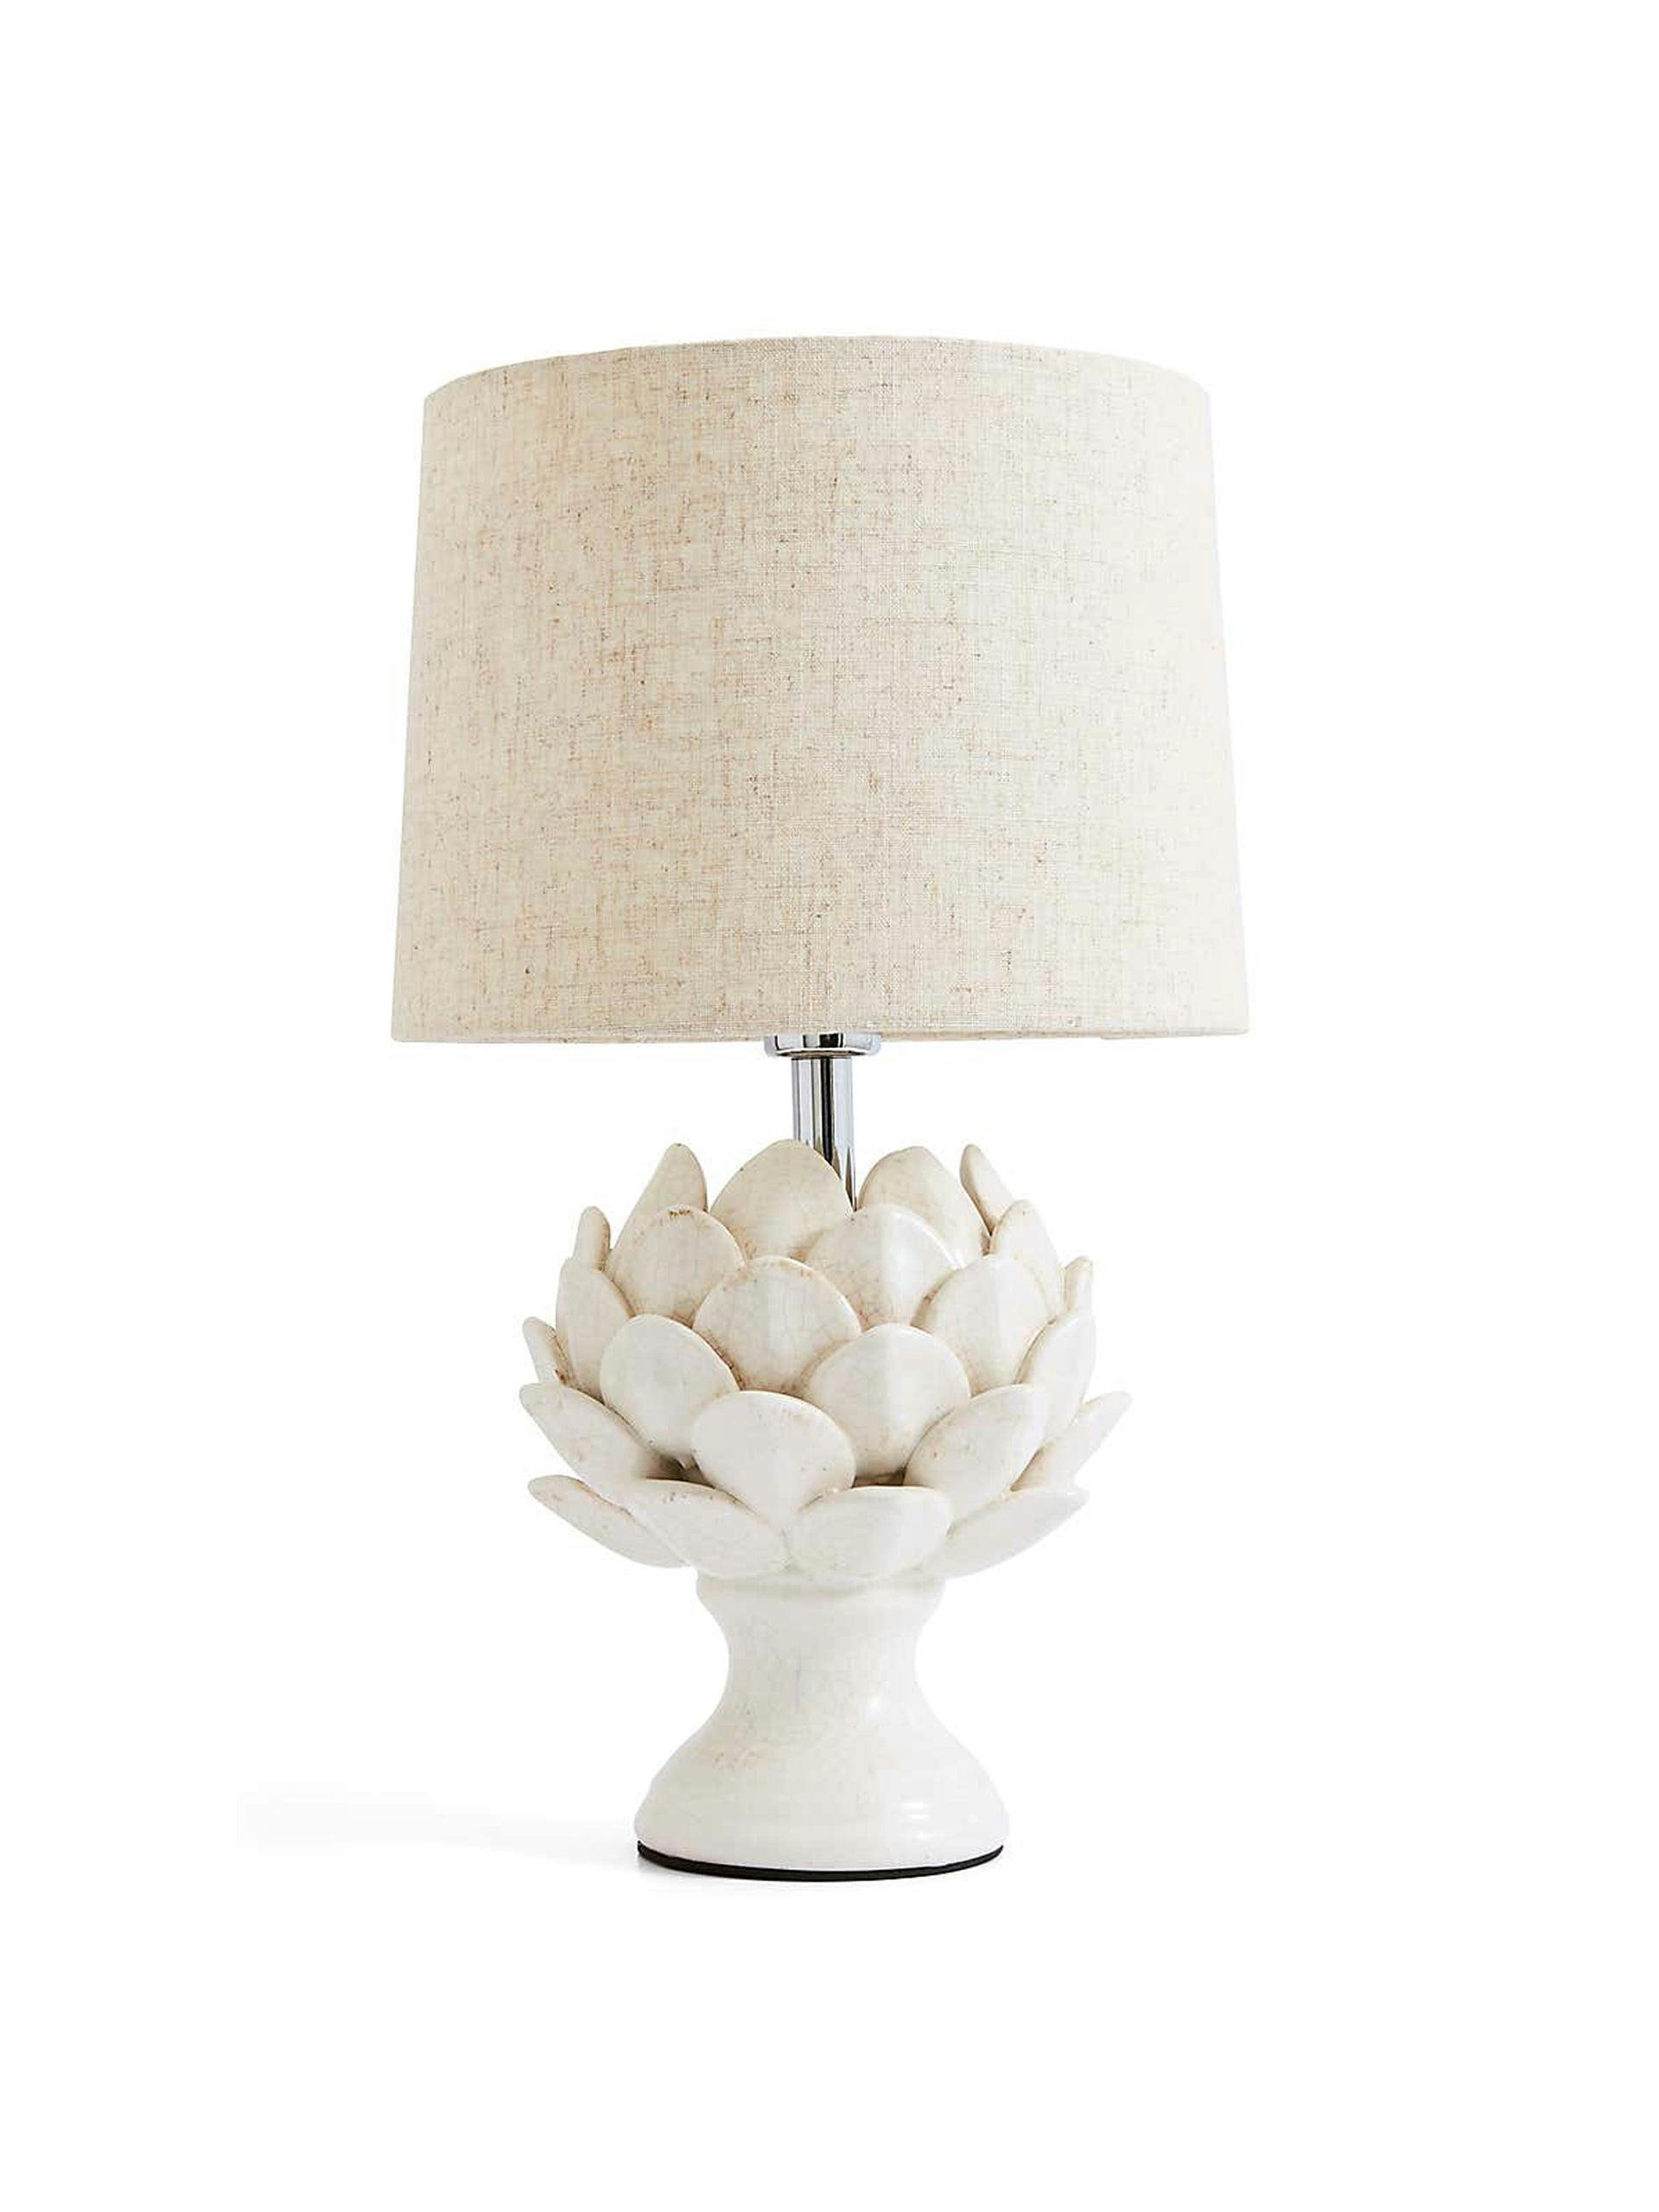 Cream artichoke table lamp with linen lampshade